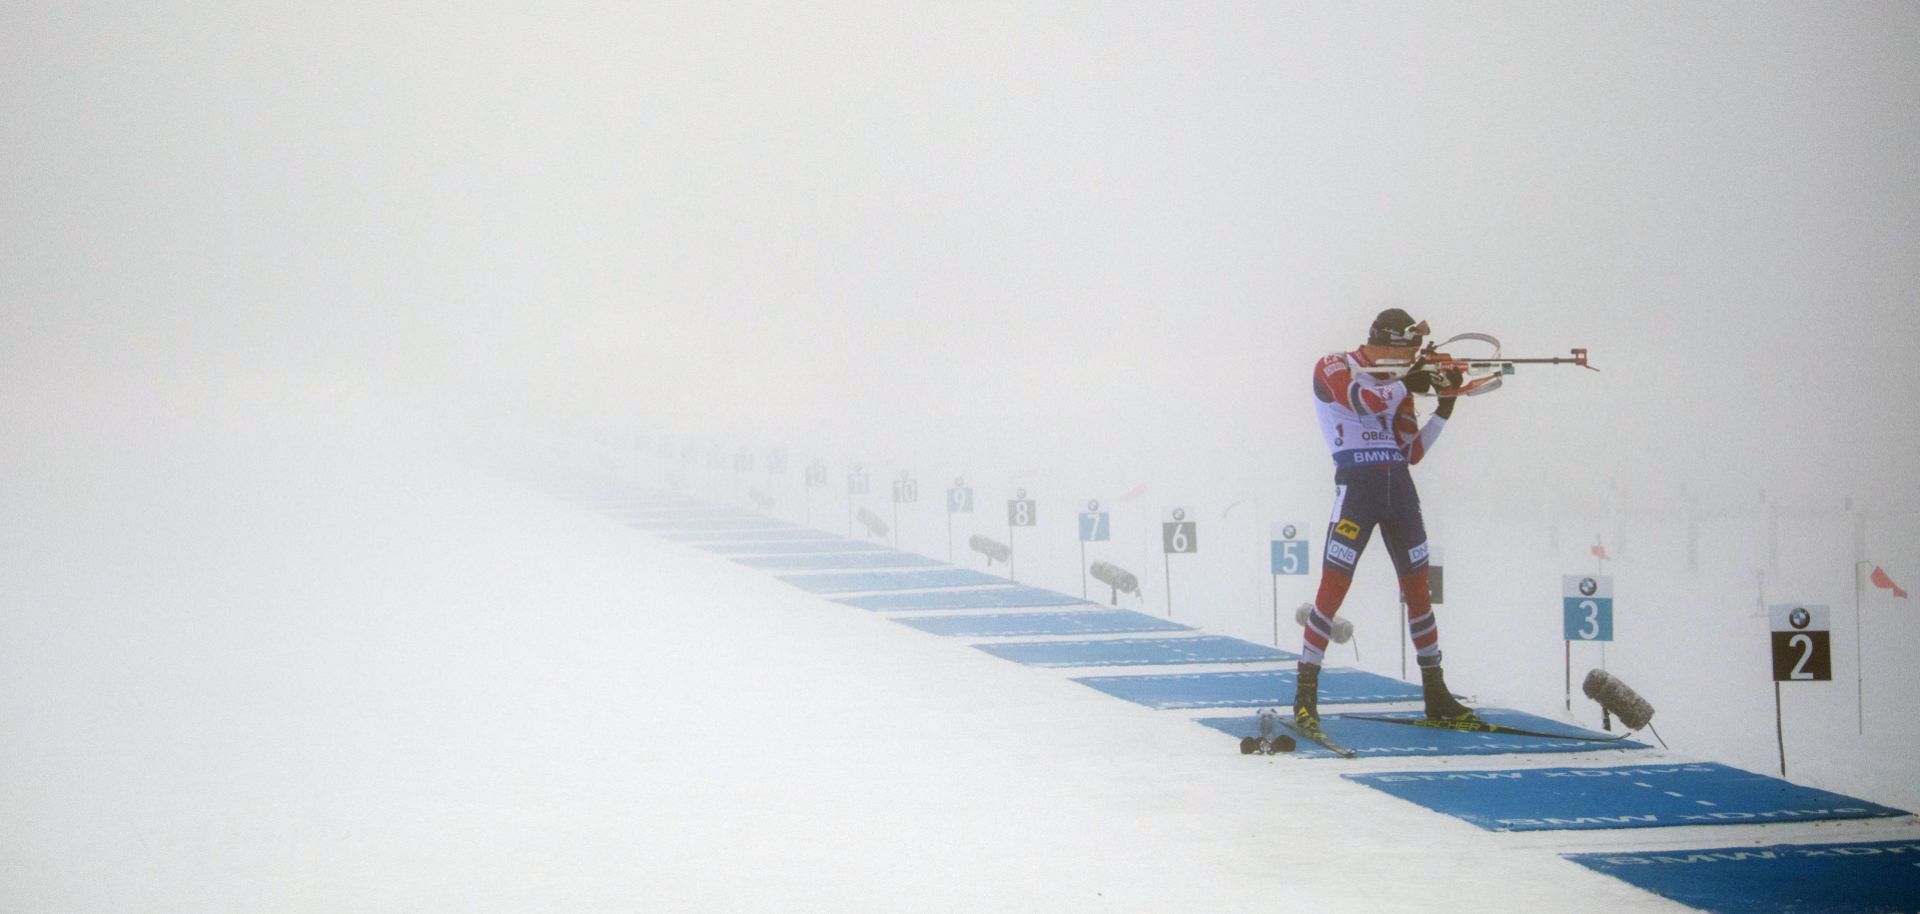 A Norwegian athlete competes in the Biathlon World Cup, a precursor to this year's Pyeongchang Olympics.